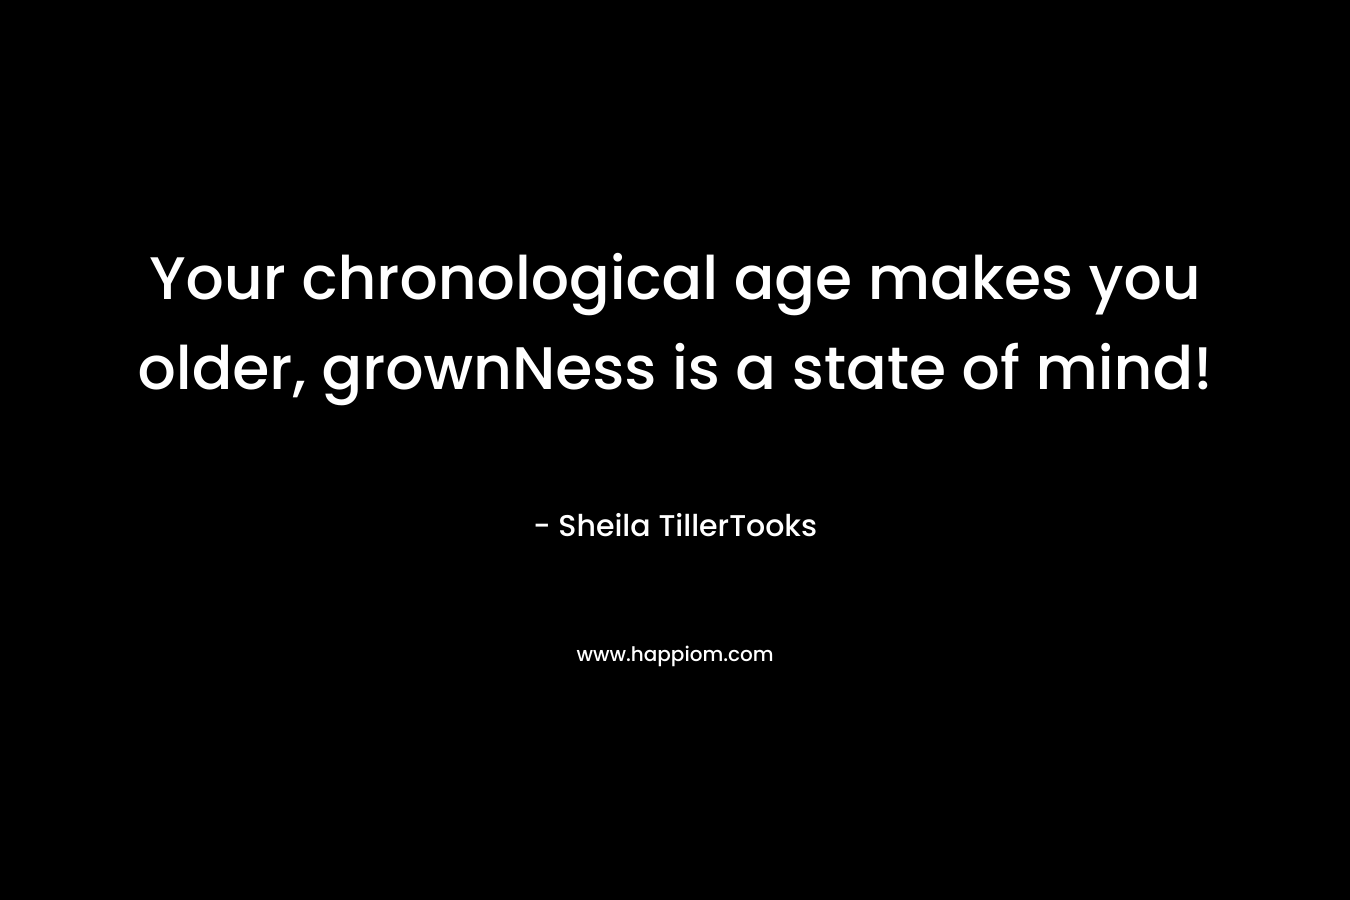 Your chronological age makes you older, grownNess is a state of mind! – Sheila TillerTooks